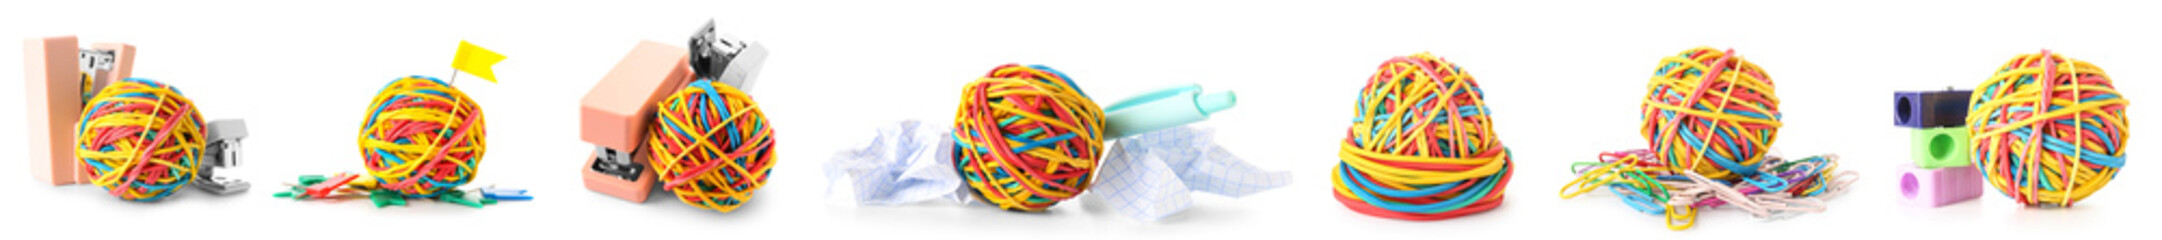 Collection of colorful rubber band balls with office supplies on white background